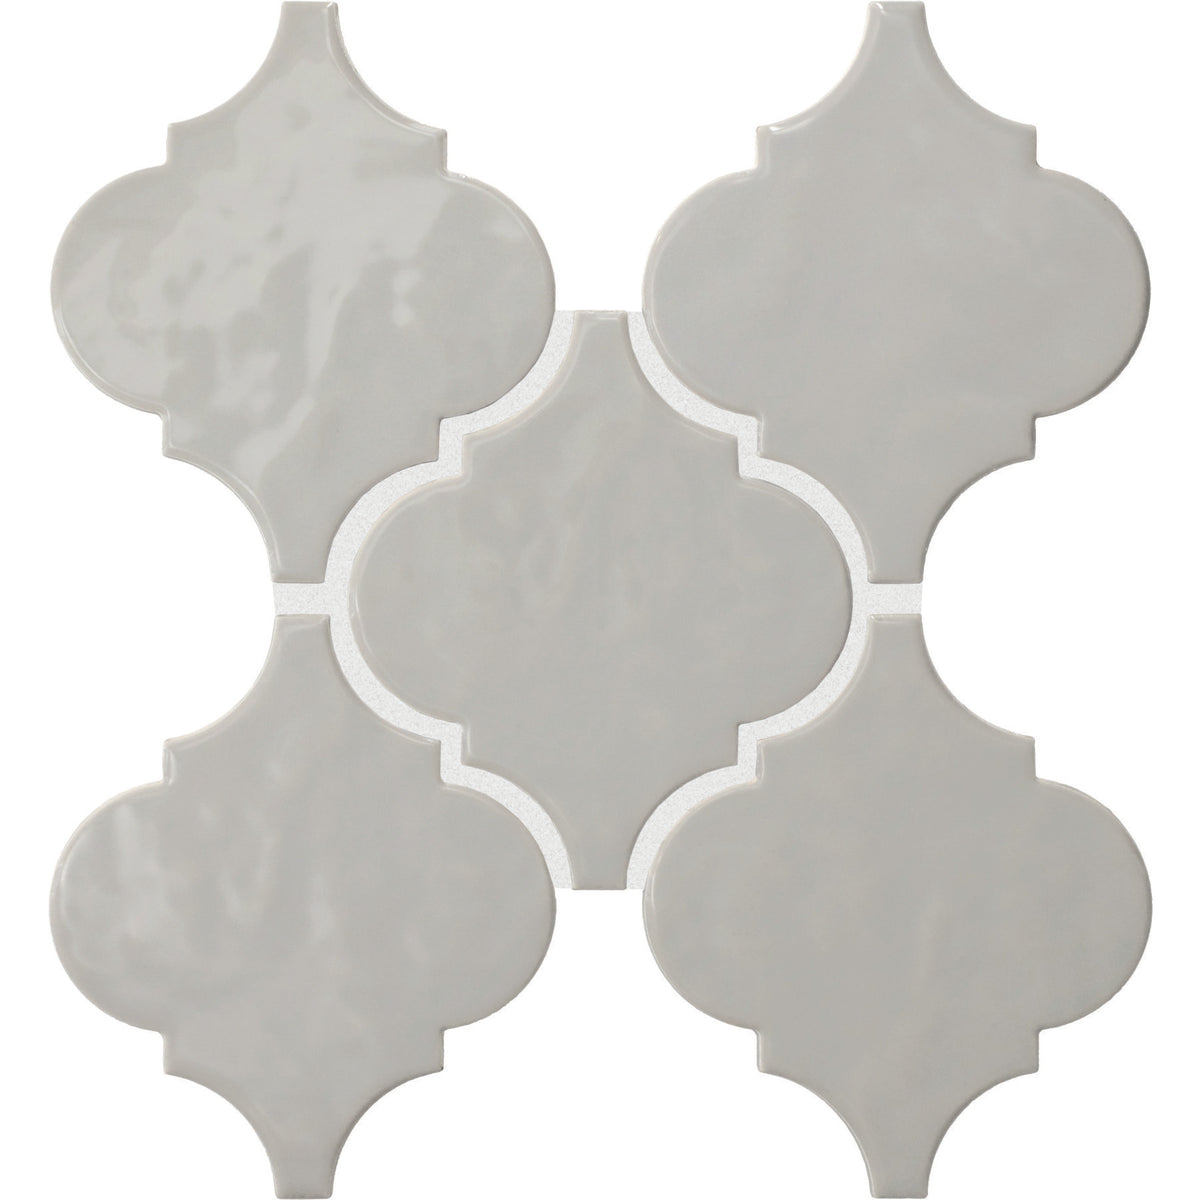 American Olean - Playscapes Arabesque Wall Tile - Silverside PS73